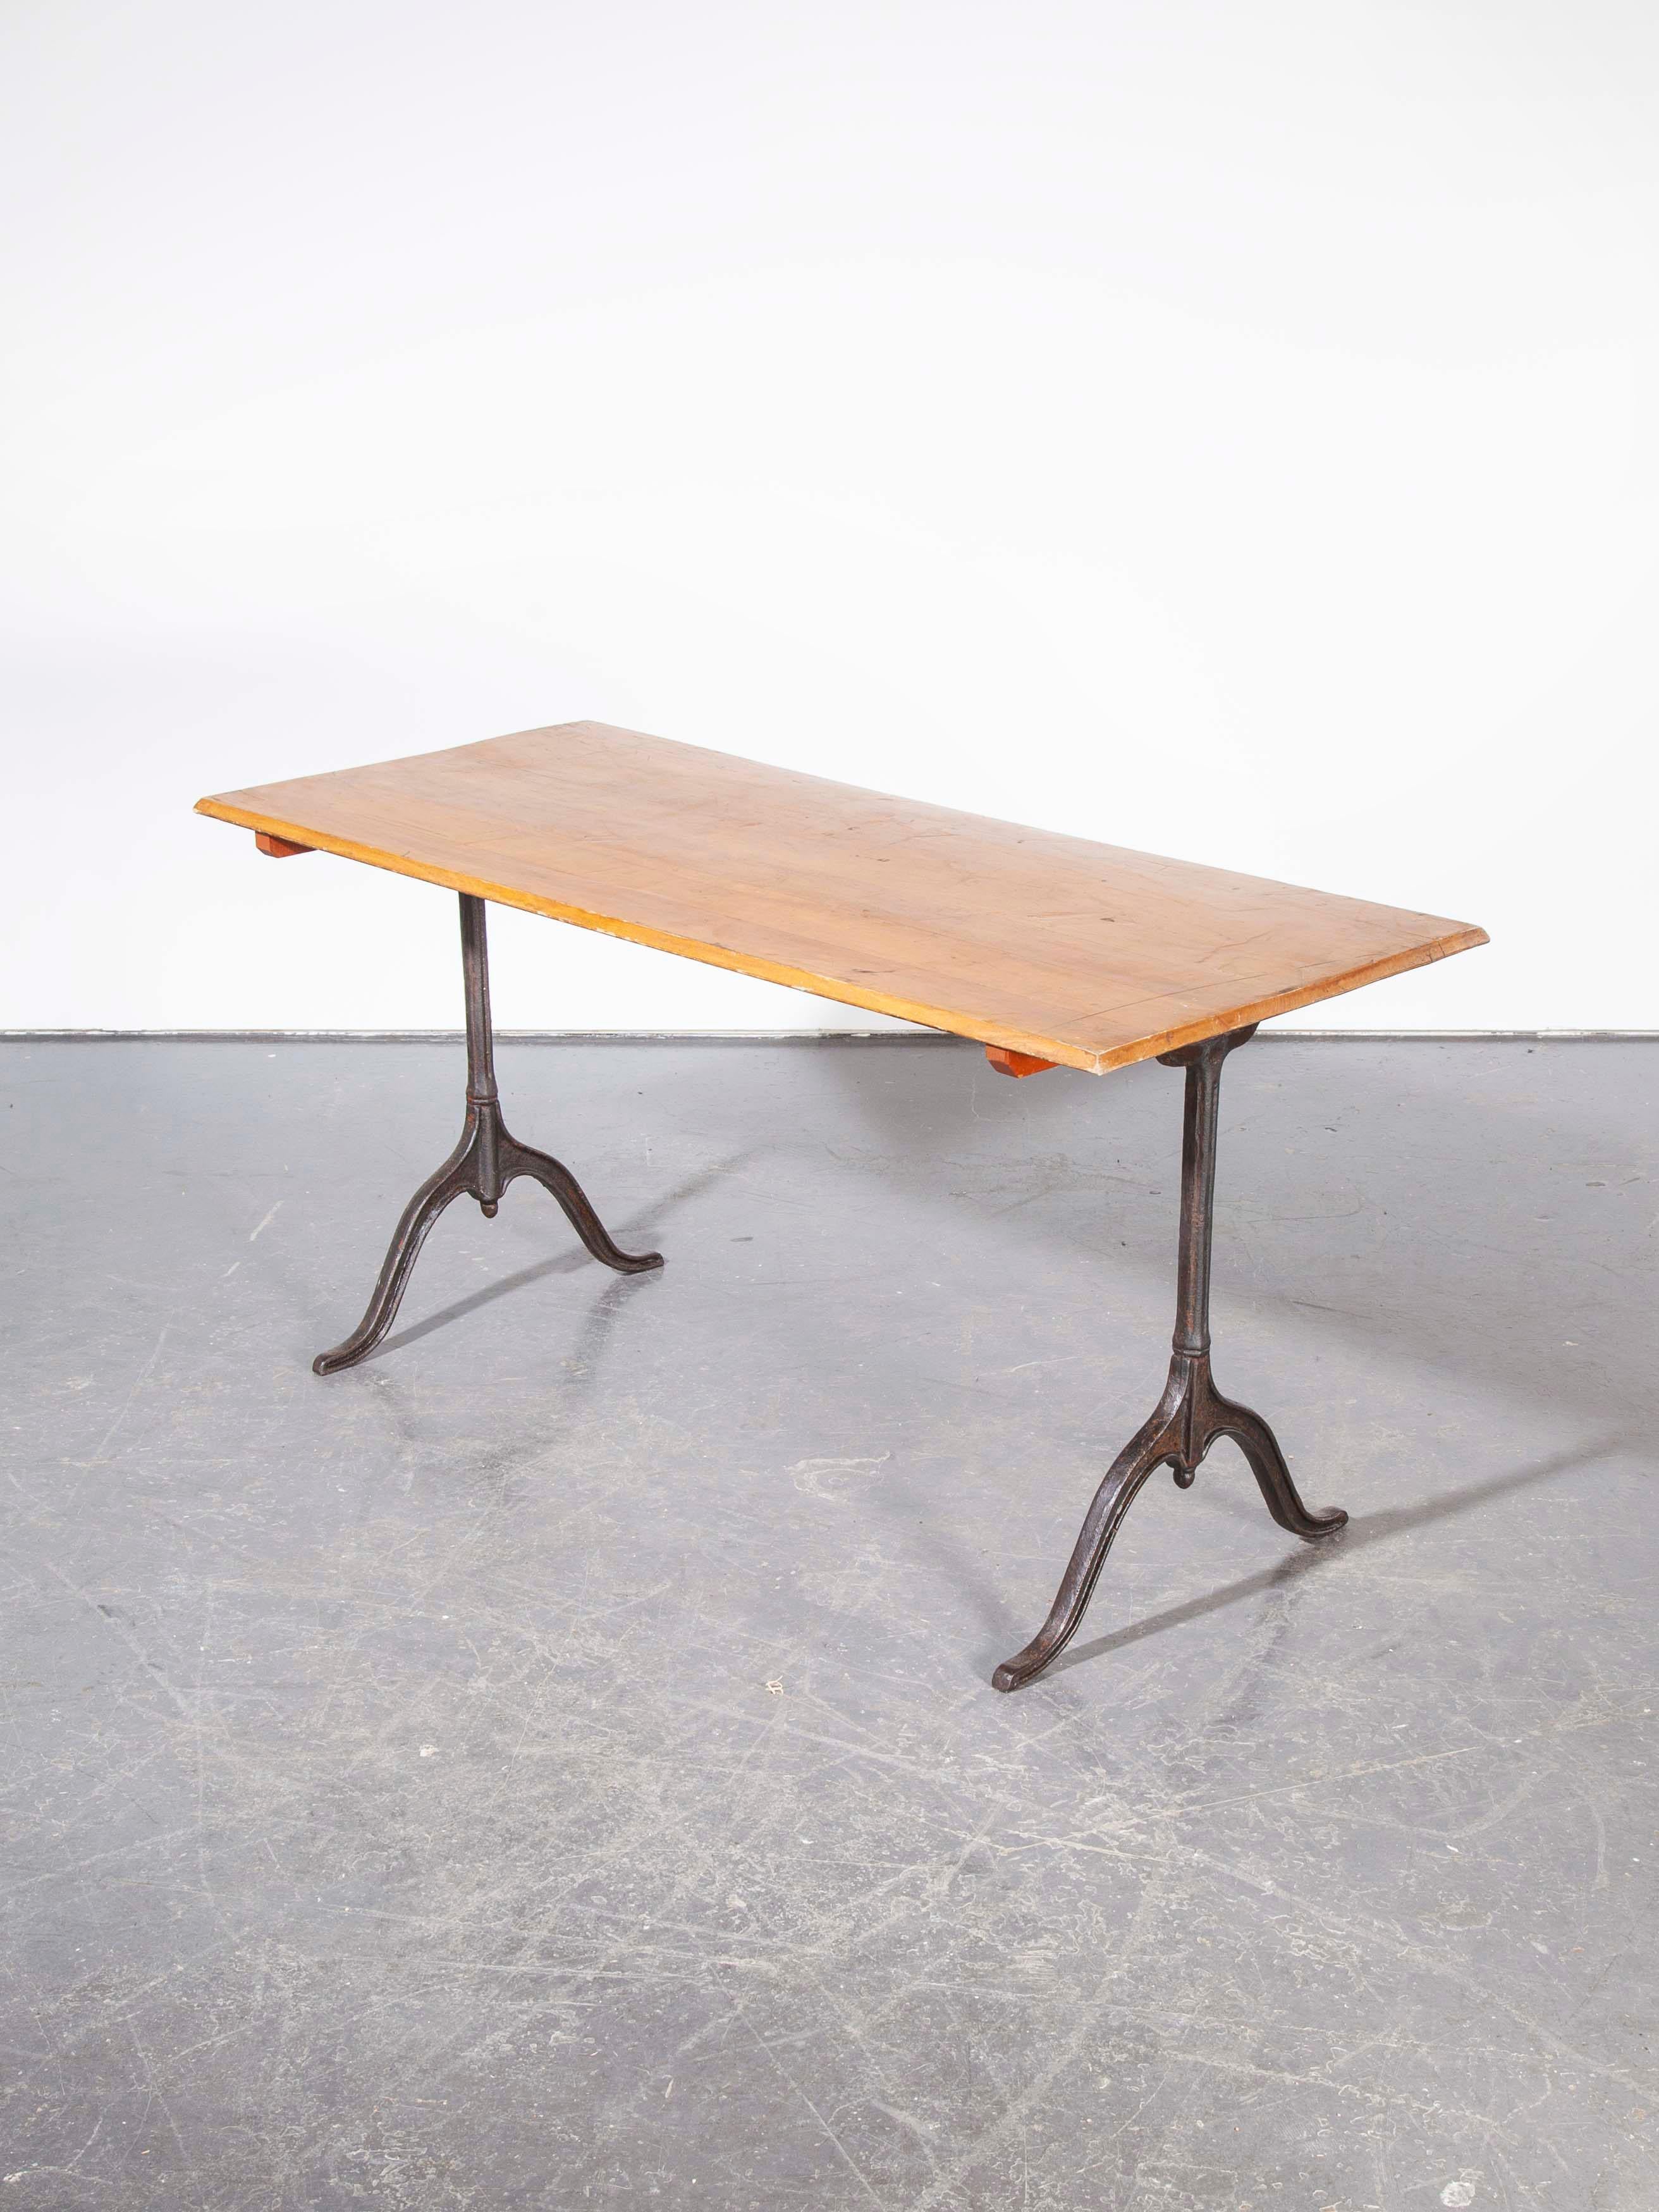 1930s cast metal base Kronenbourg café dining – bistro table – model two. Four tables are available, this is a listing for one table as photographed. Sourced from the original Kronenbourg site in Alsace, these were found languishing in a disused